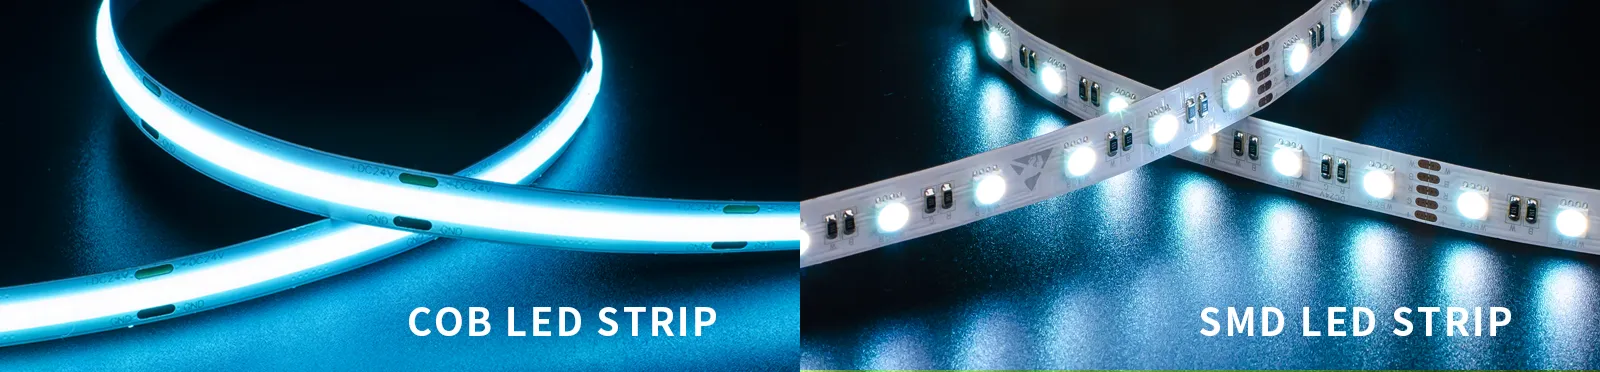 compare with COB and SMD led strip lights